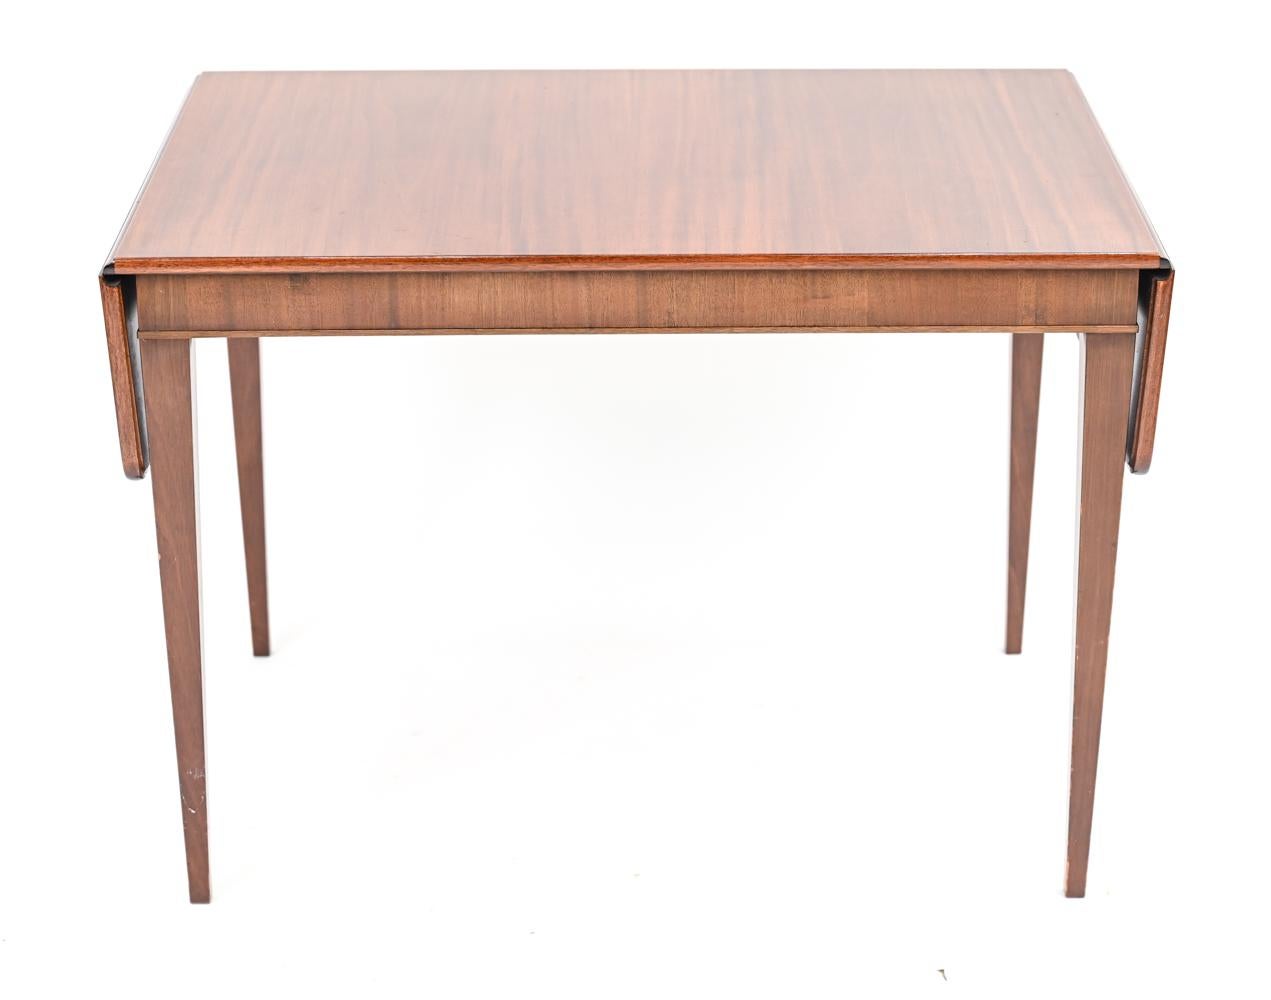 An elegant Danish mid-century drop leaf side table in handsomely grained mahogany. Designed by Frits Henningsen, this table is characteristic of his transition from traditional furniture to Scandinavian modern minimalist design. Dimensions provided